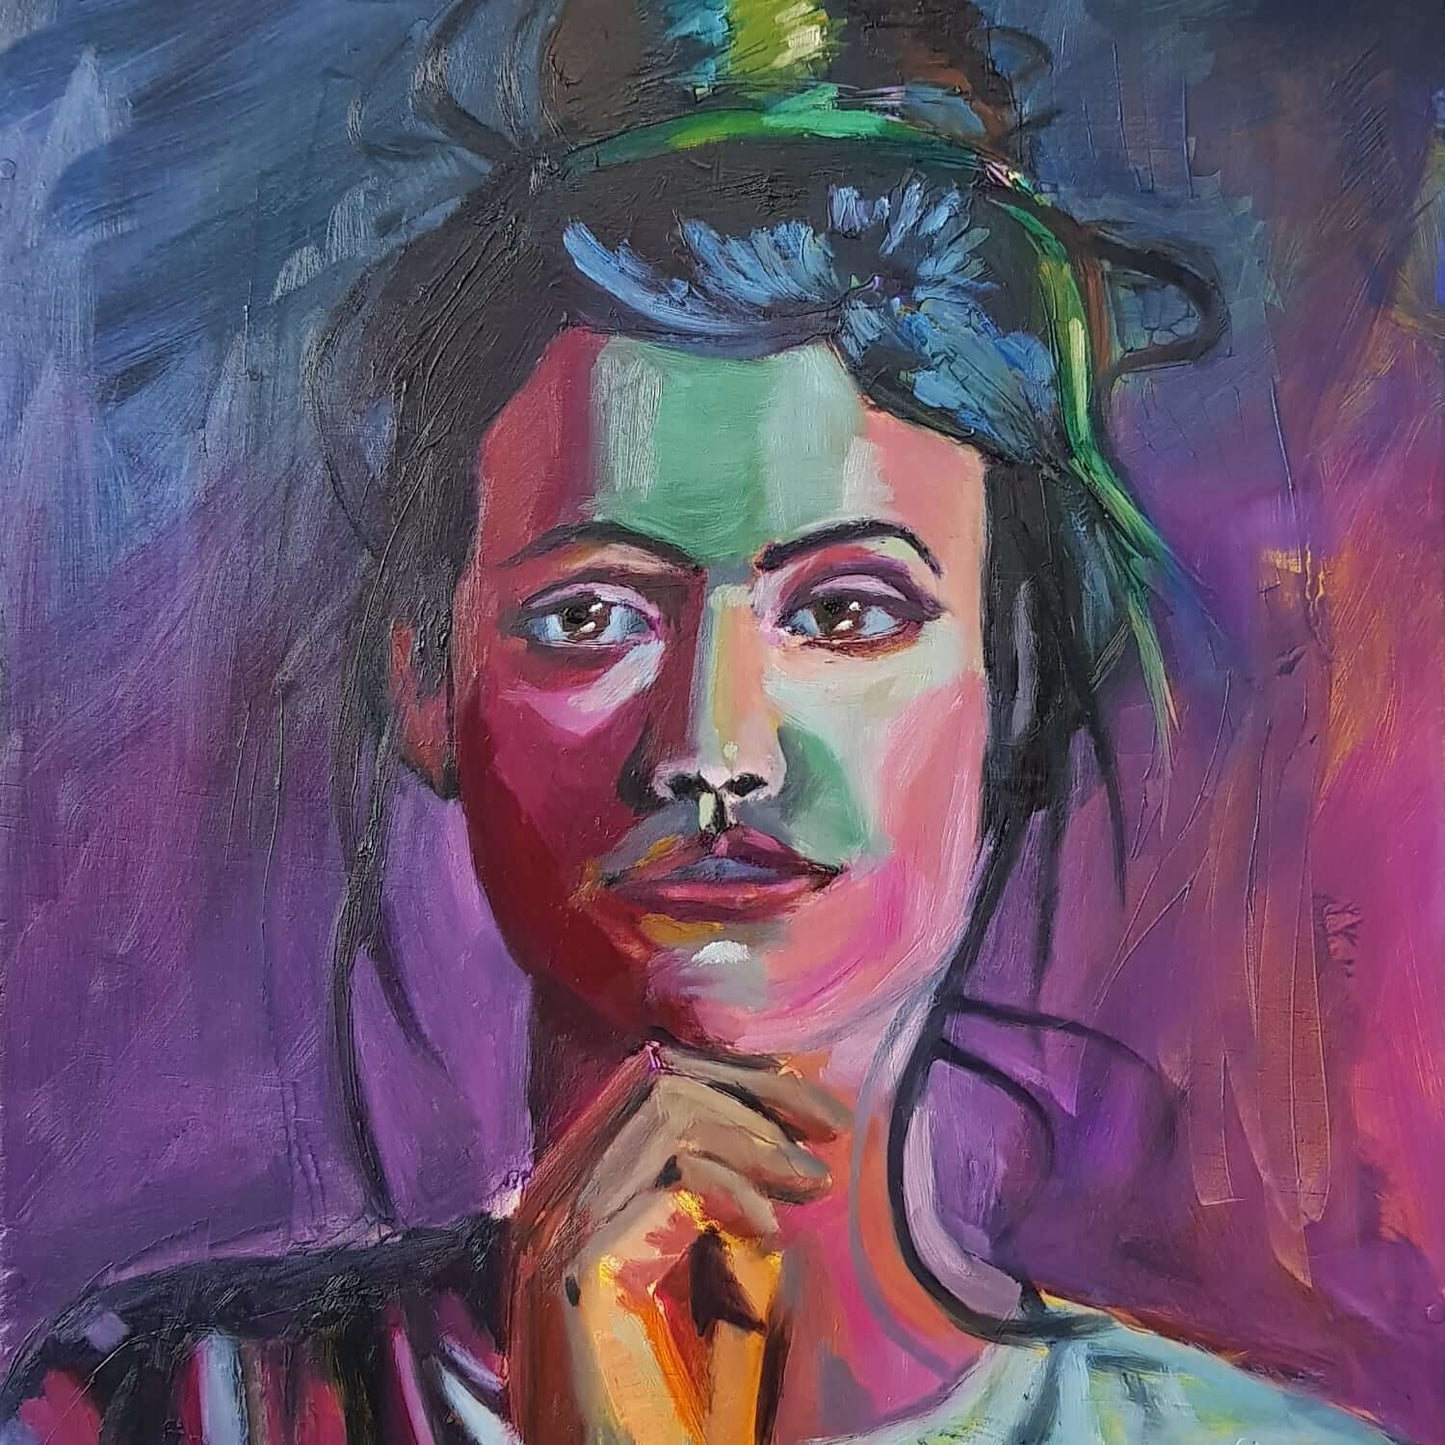 Original Oil Painting of a Woman, Purple, Blue & Pink, 12" x 12" Painting onWooden Panel